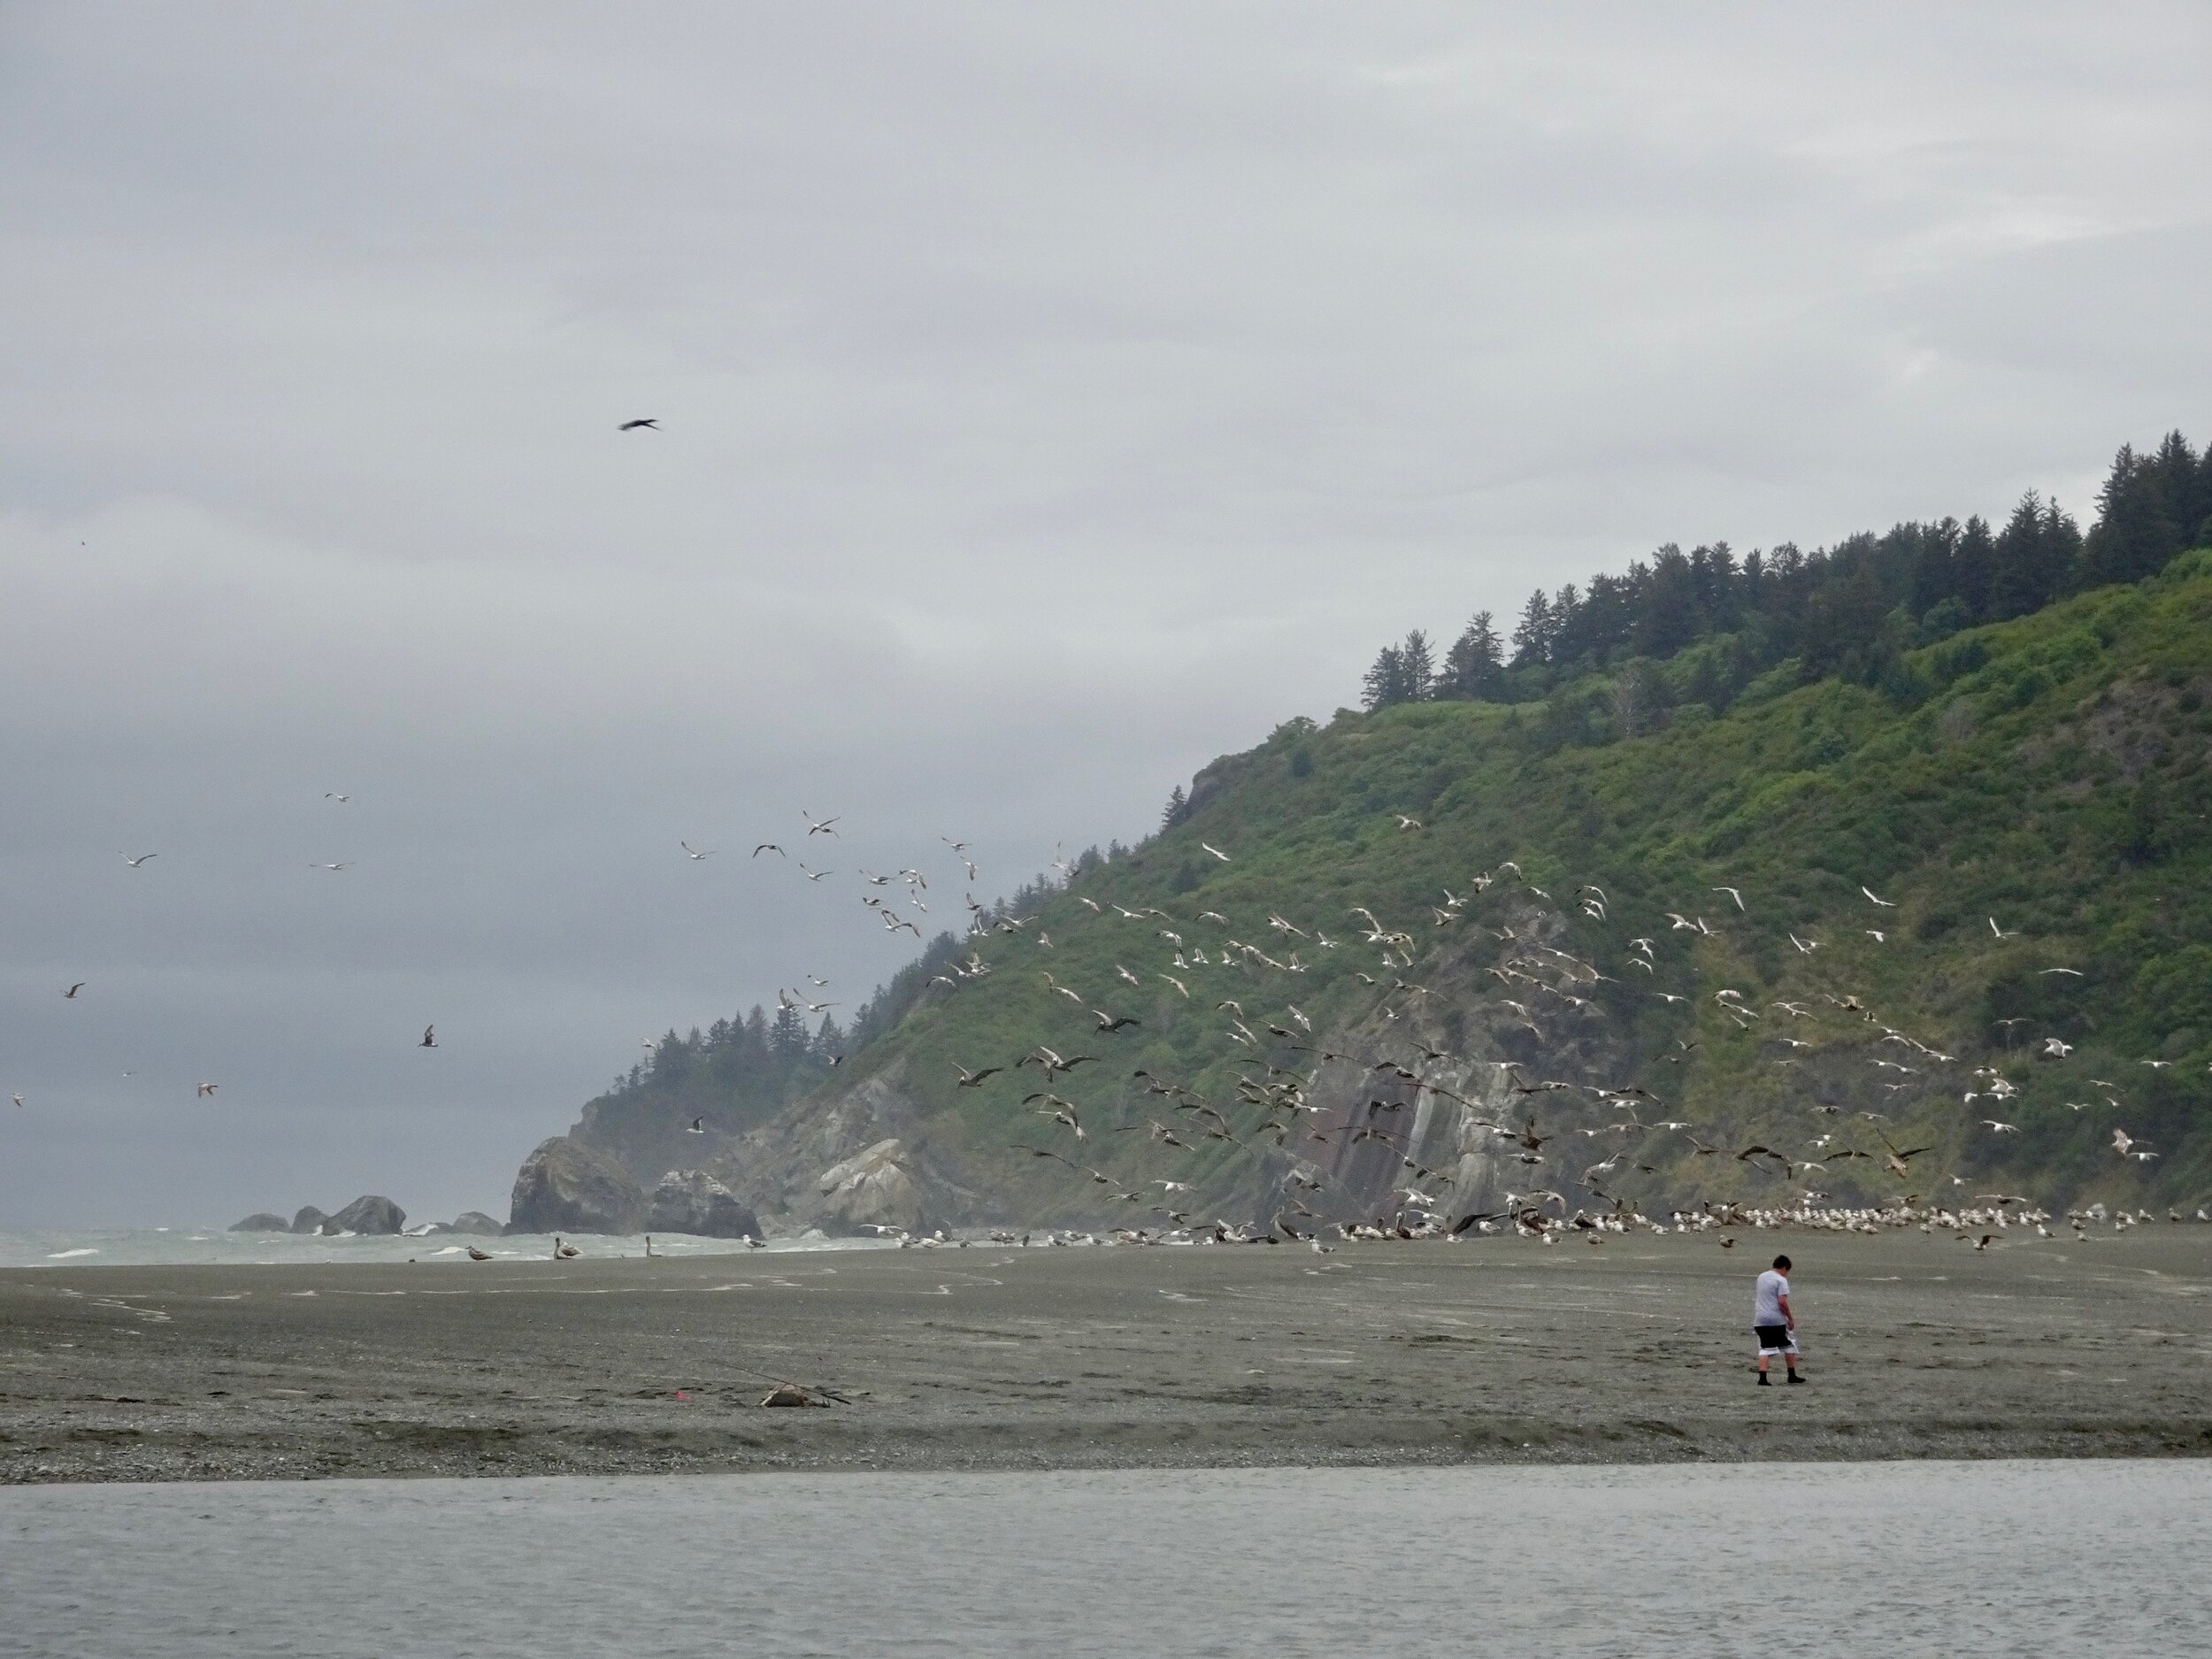 The birds were everywhere while fishing was happening.  Behind them and up top was the first overlook we sat at by the Klamath River.  Photo by Karen Boudreaux, June 12, 2021